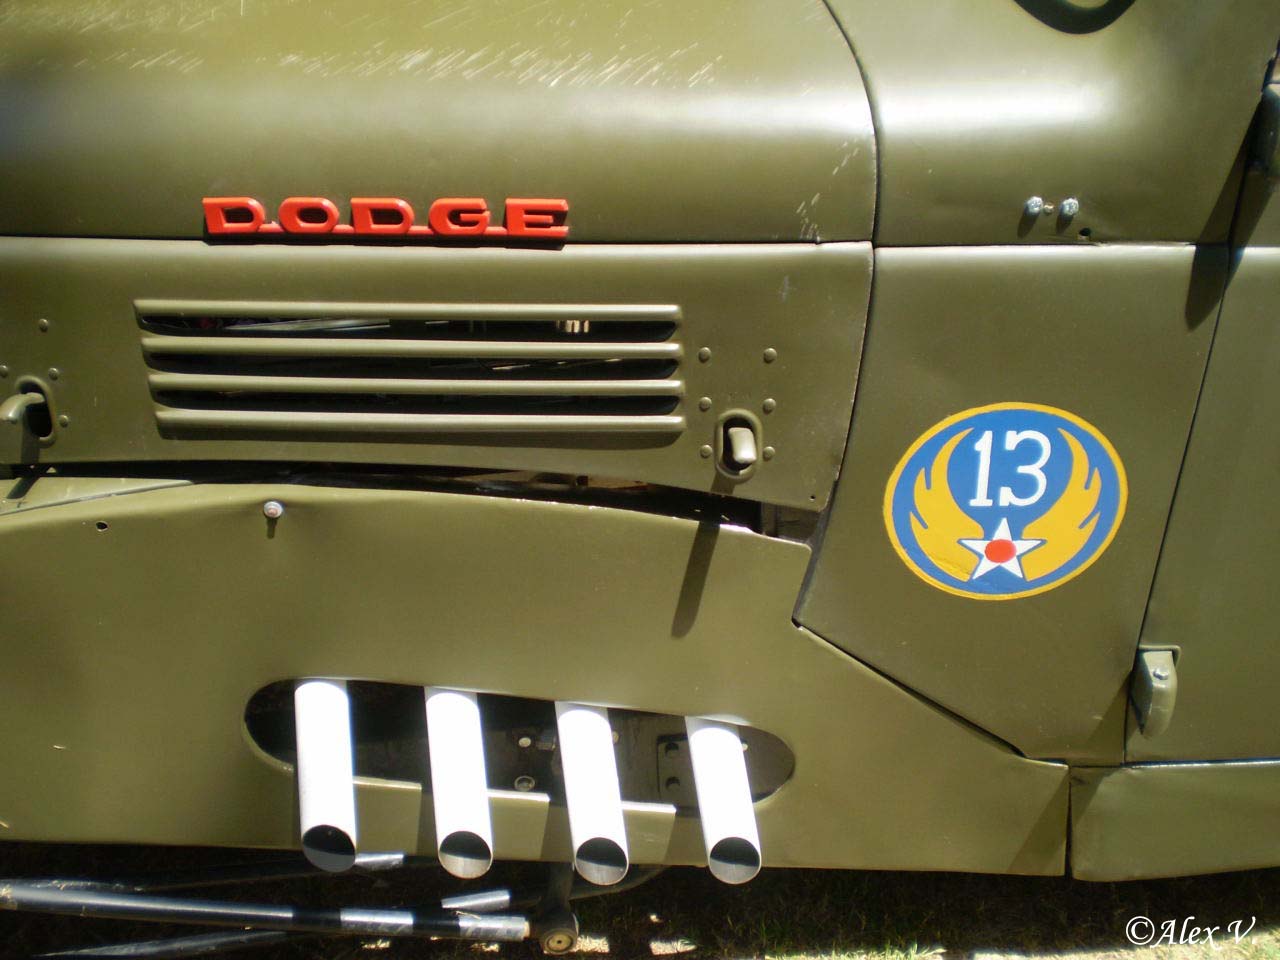 an army truck emblem is displayed on the side